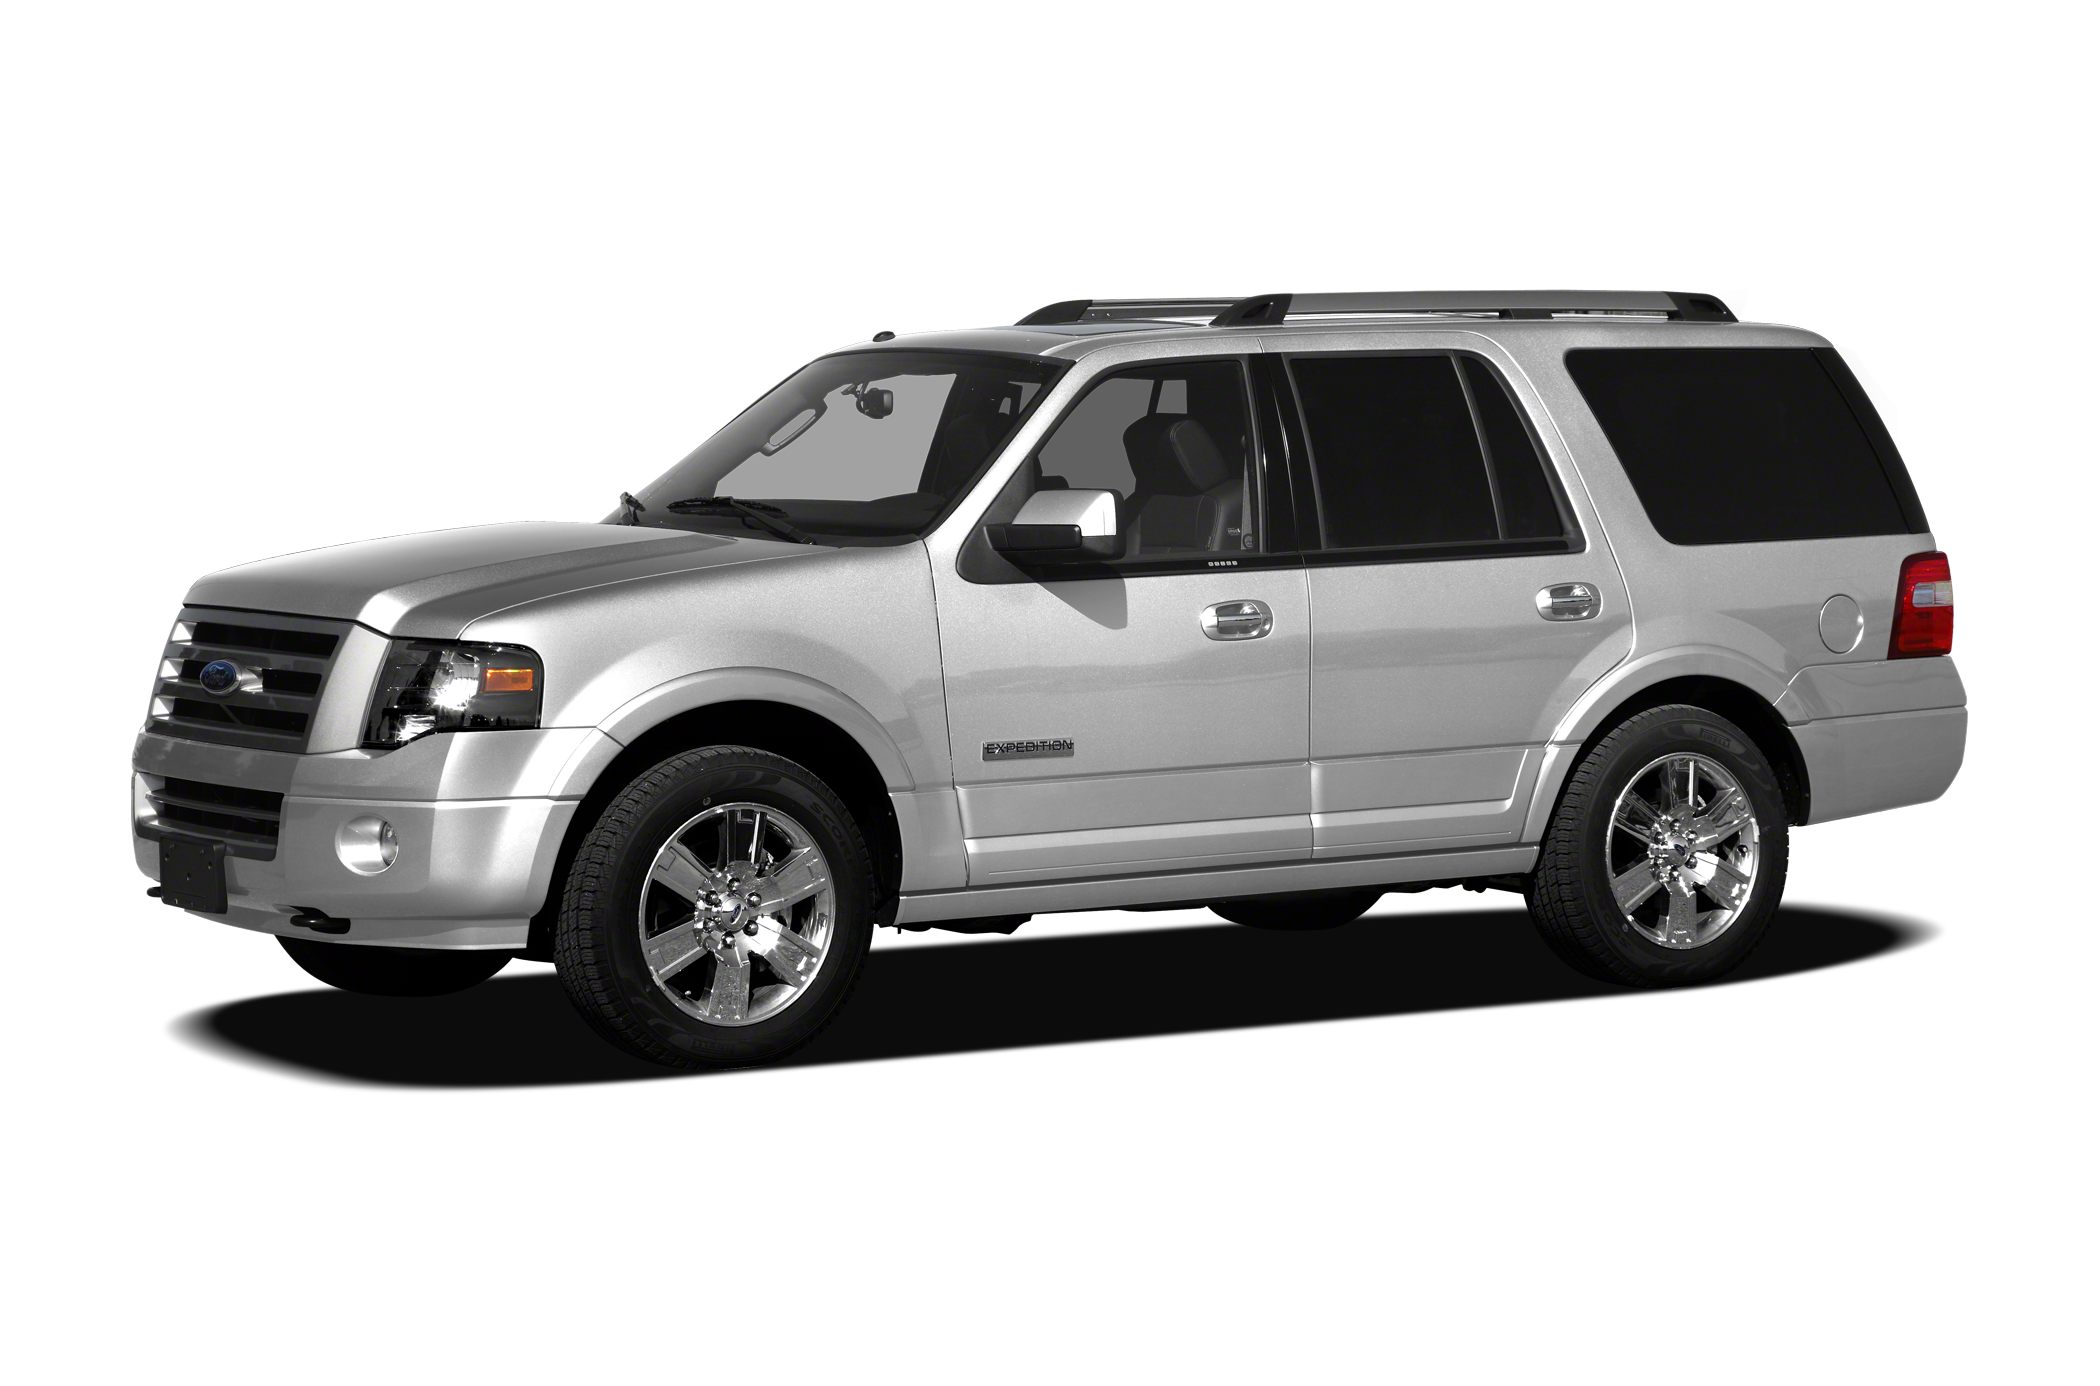 2011 Ford Expedition Reviews Specs Photos